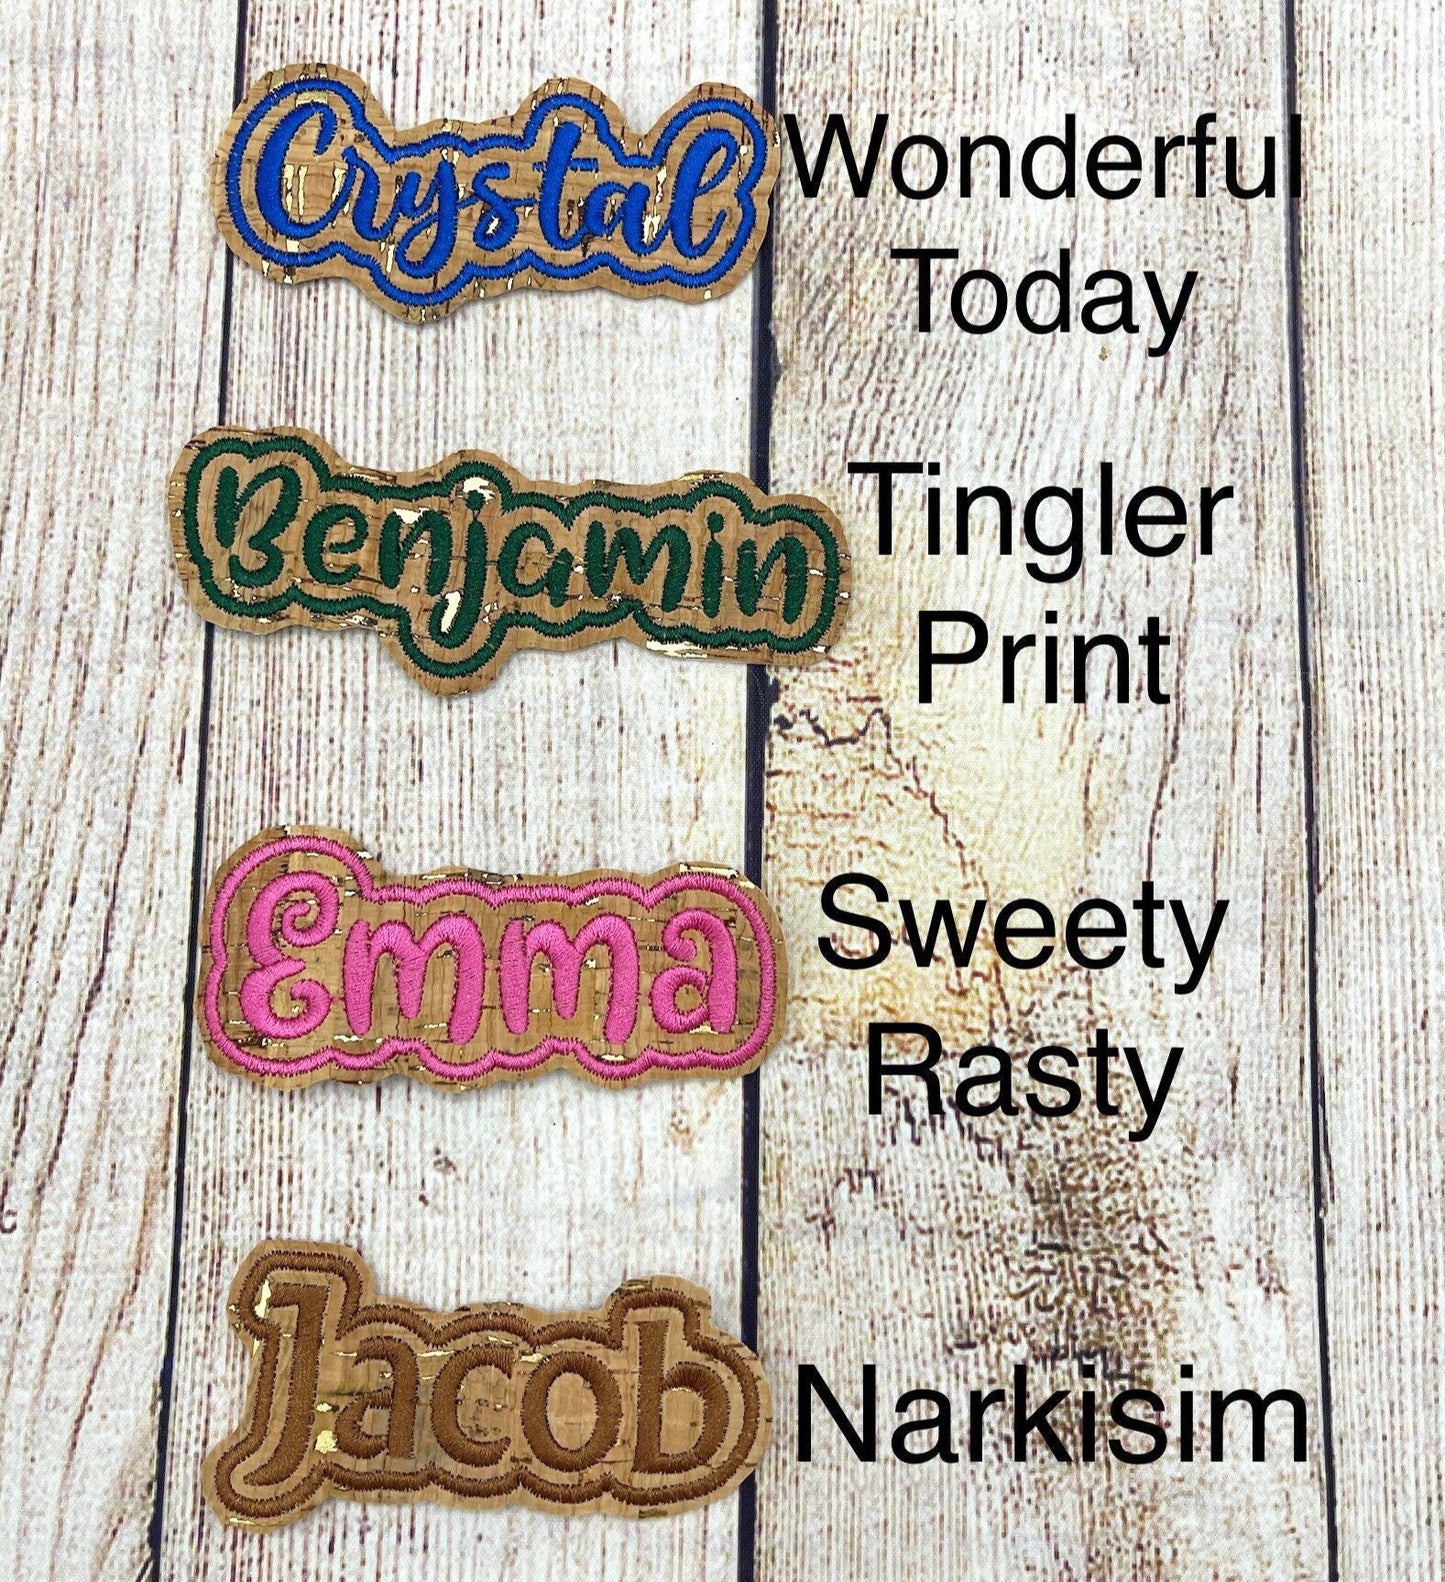 Embroidered Name Patch on Cork